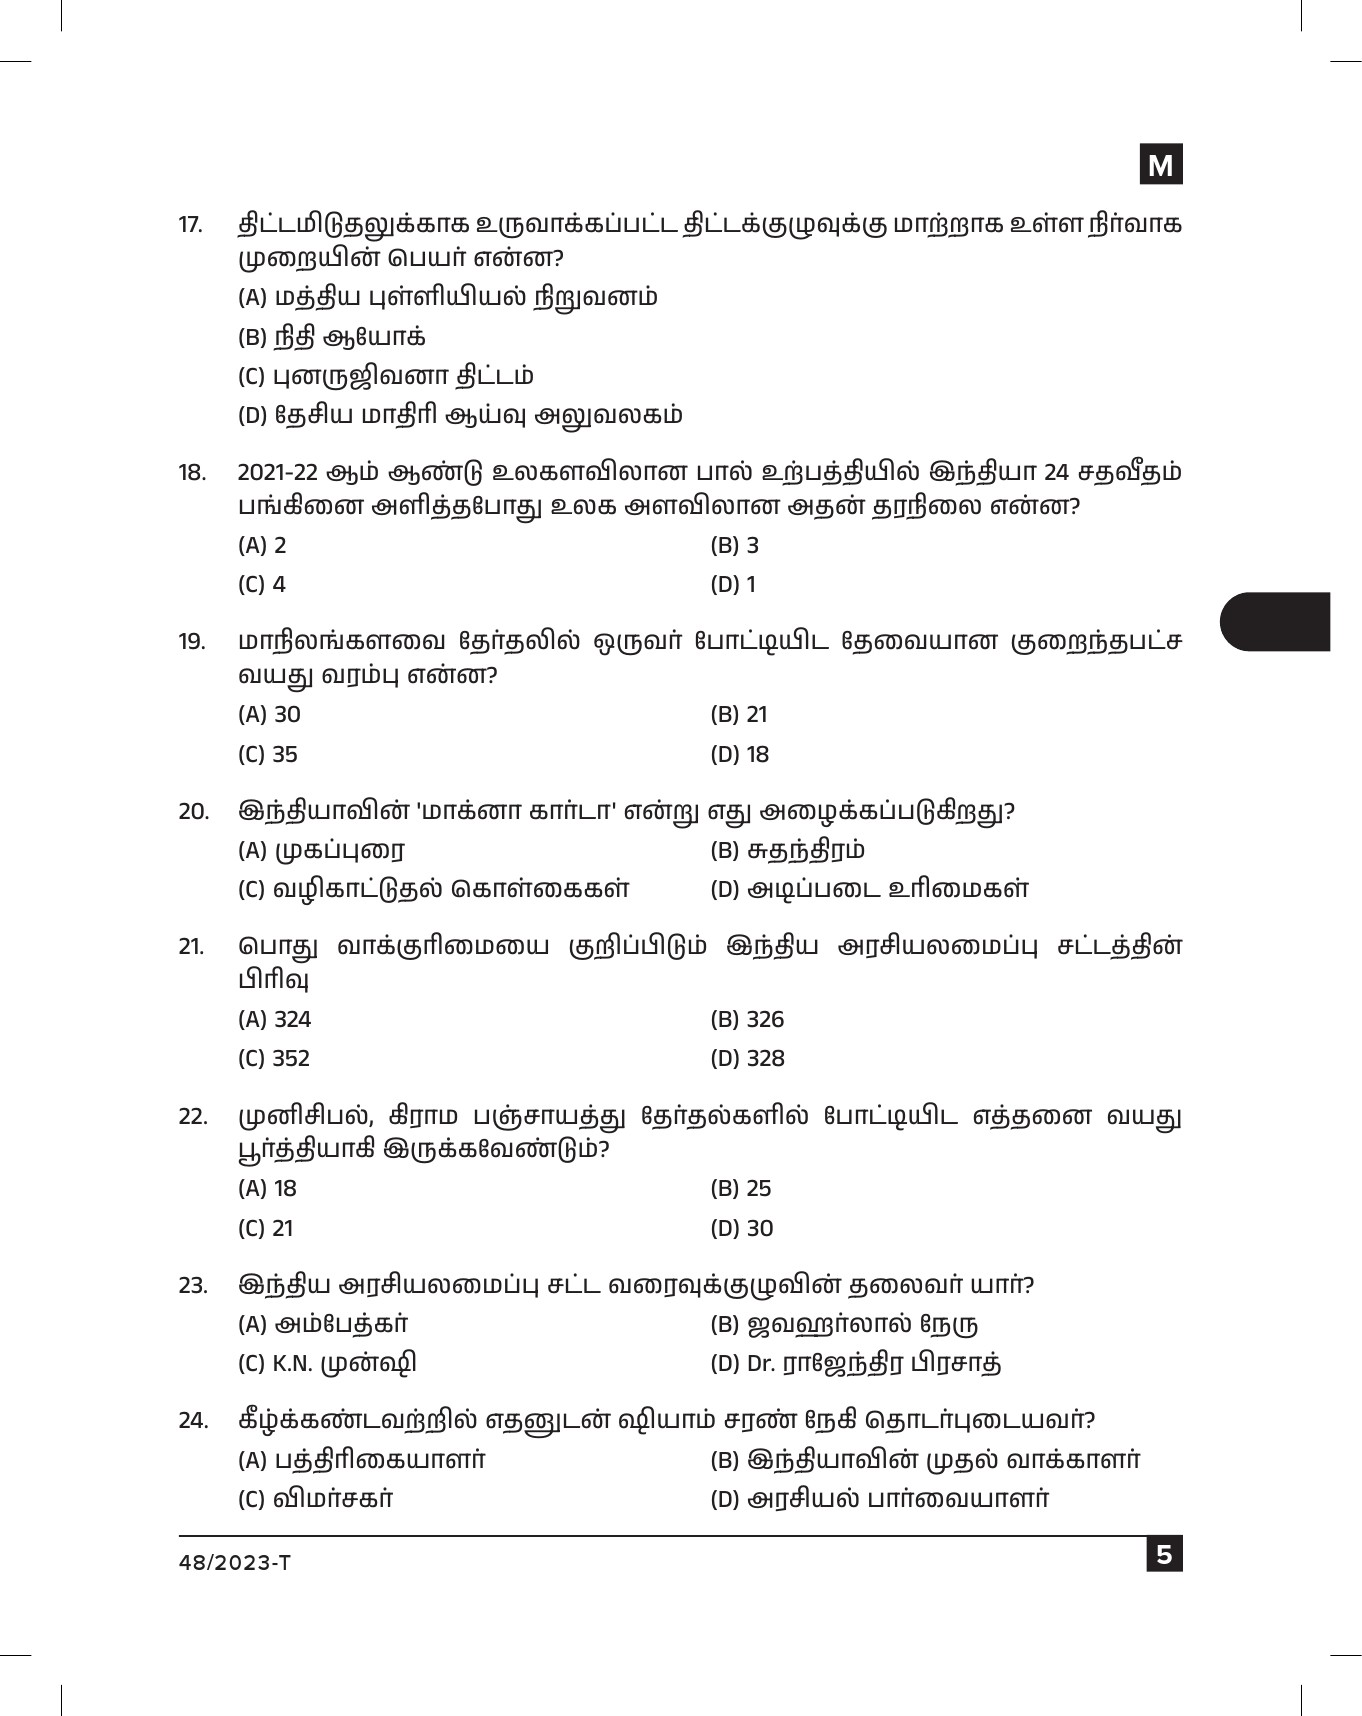 KPSC Fire and Rescue Officer Tamil Exam 2023 Code 0482023 T 4